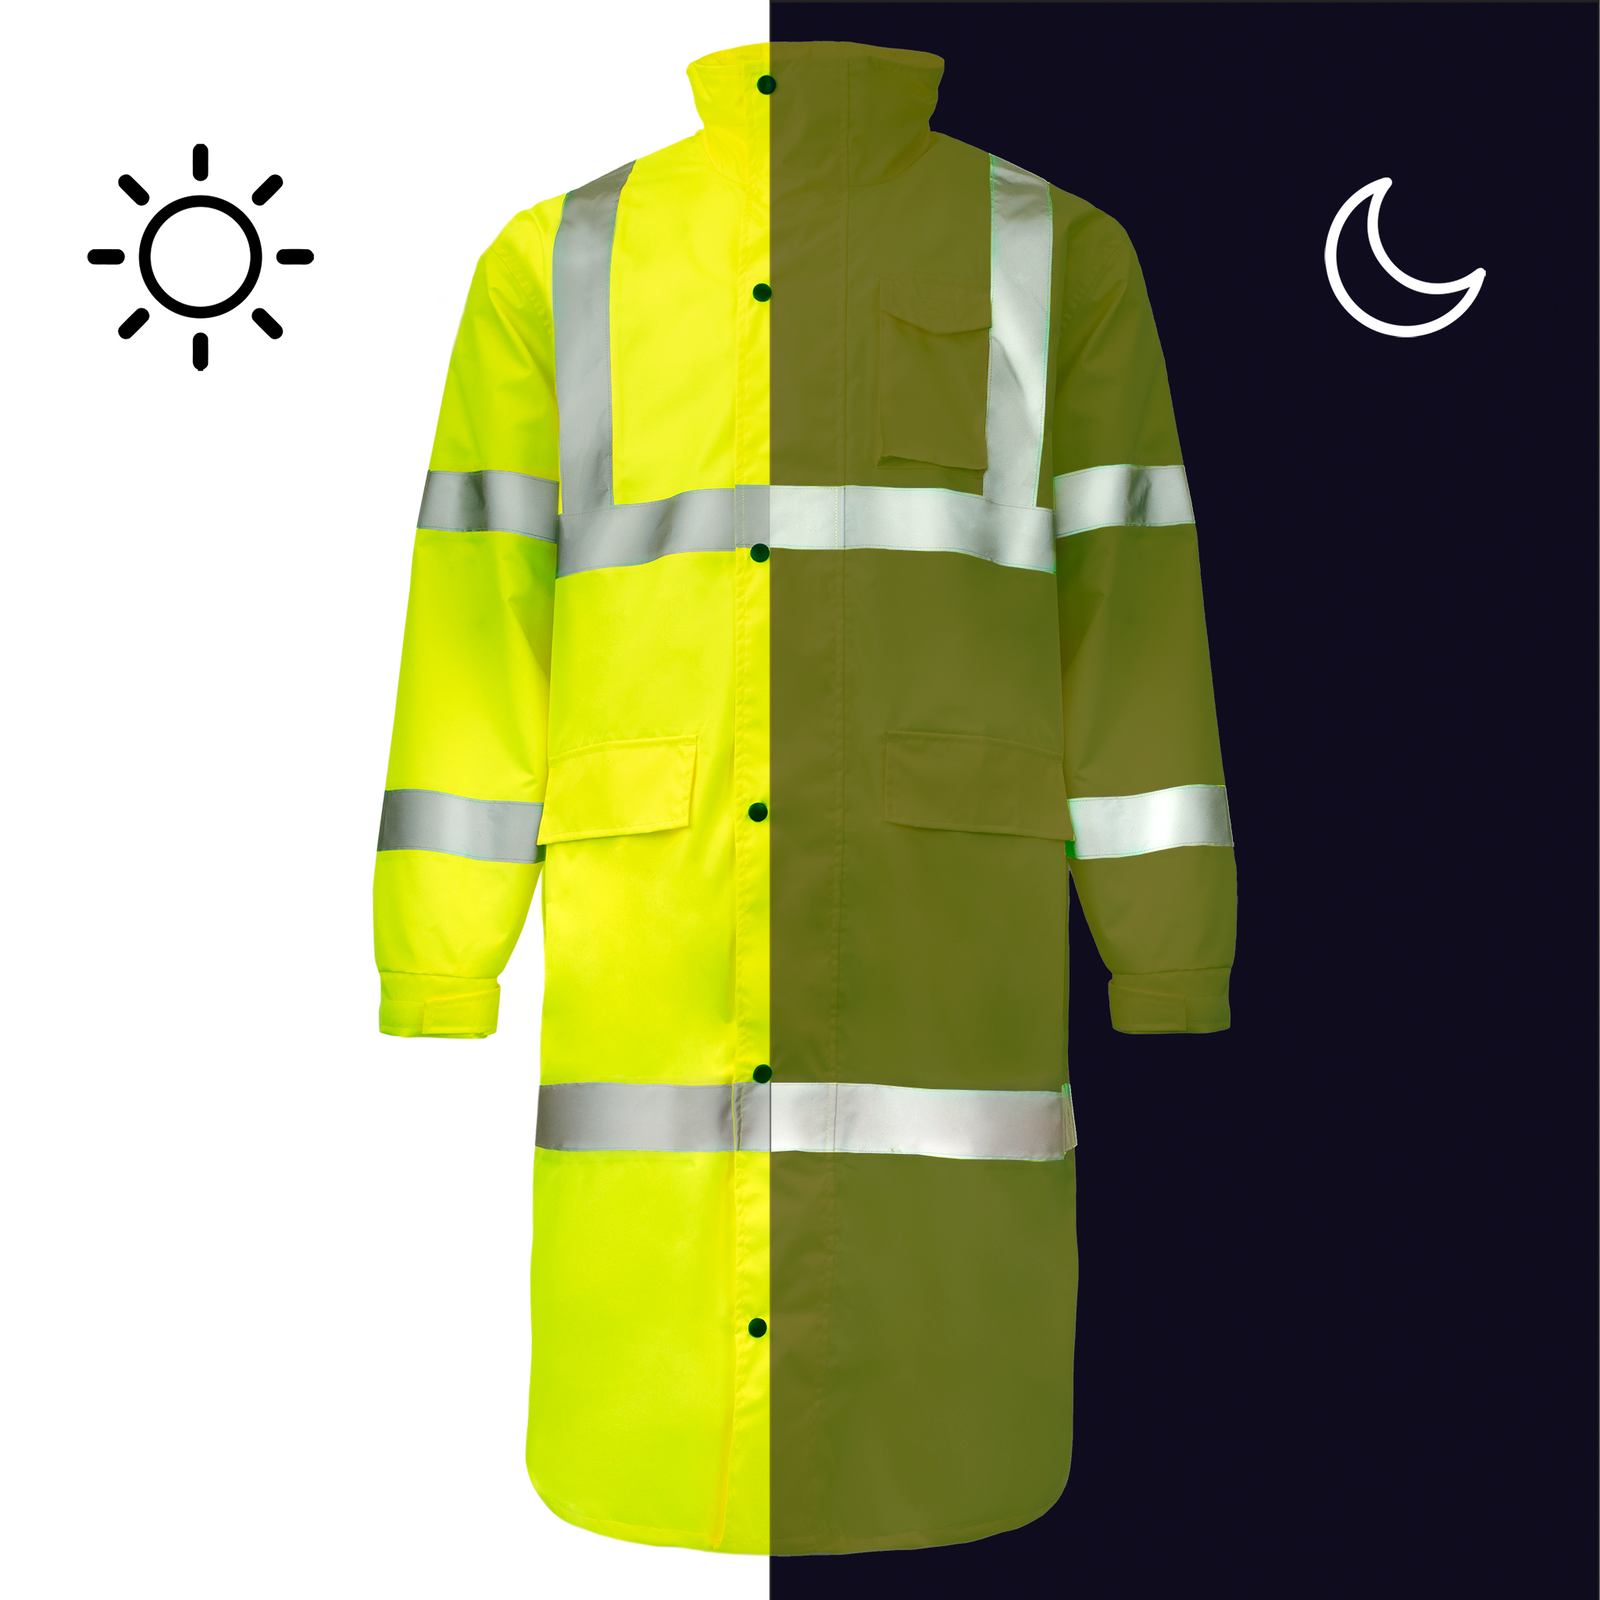 Compairs how the JORESTECH rain coat with reflective strips looks during day time and night time